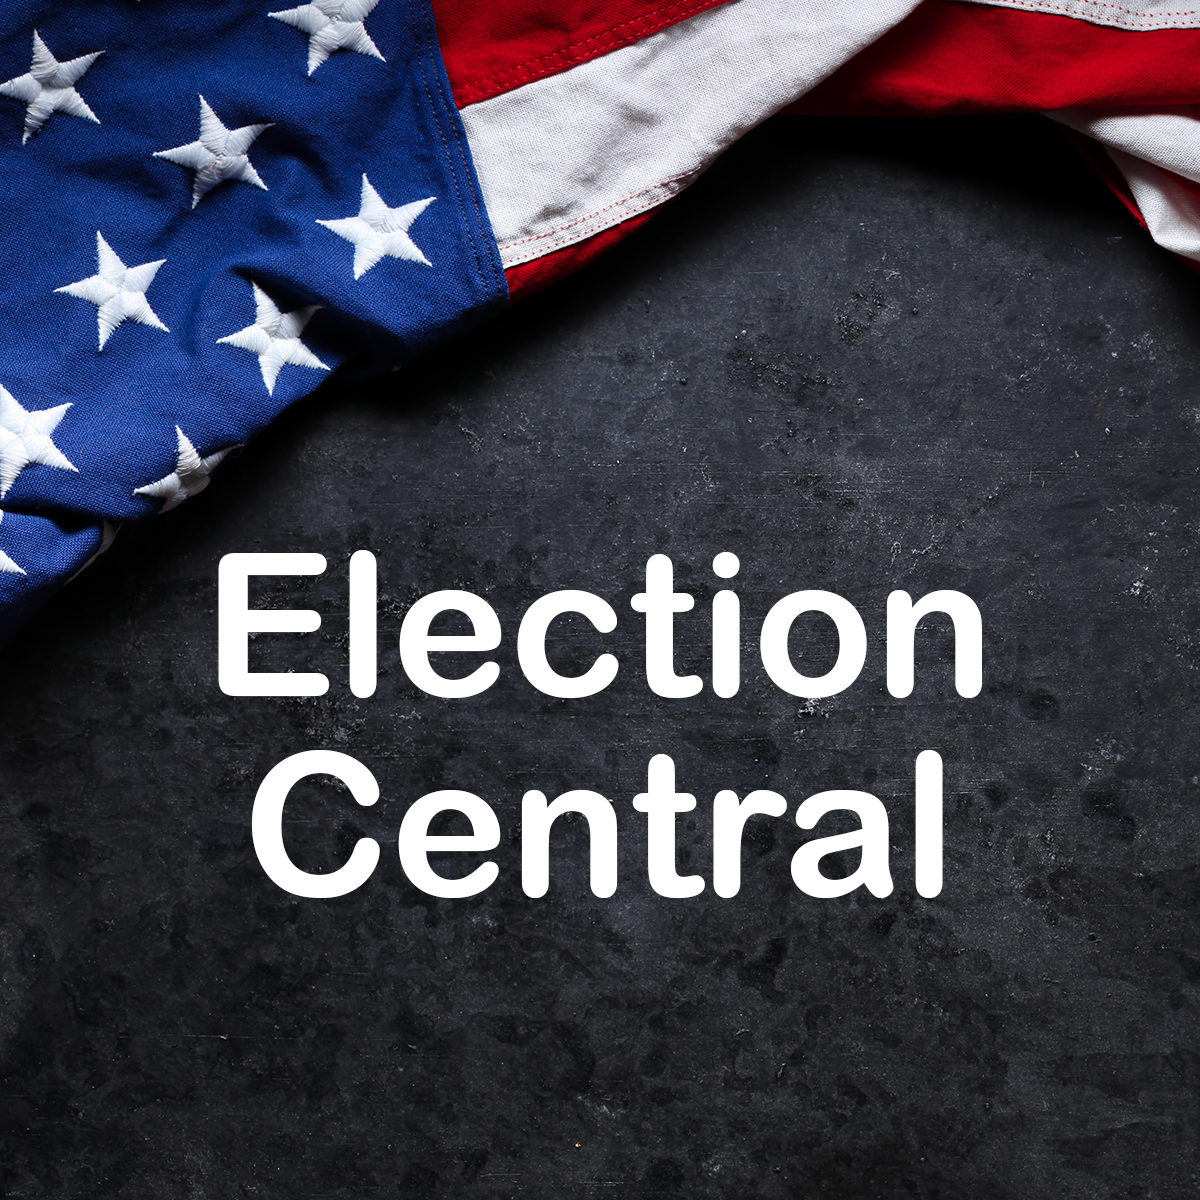 Election Central